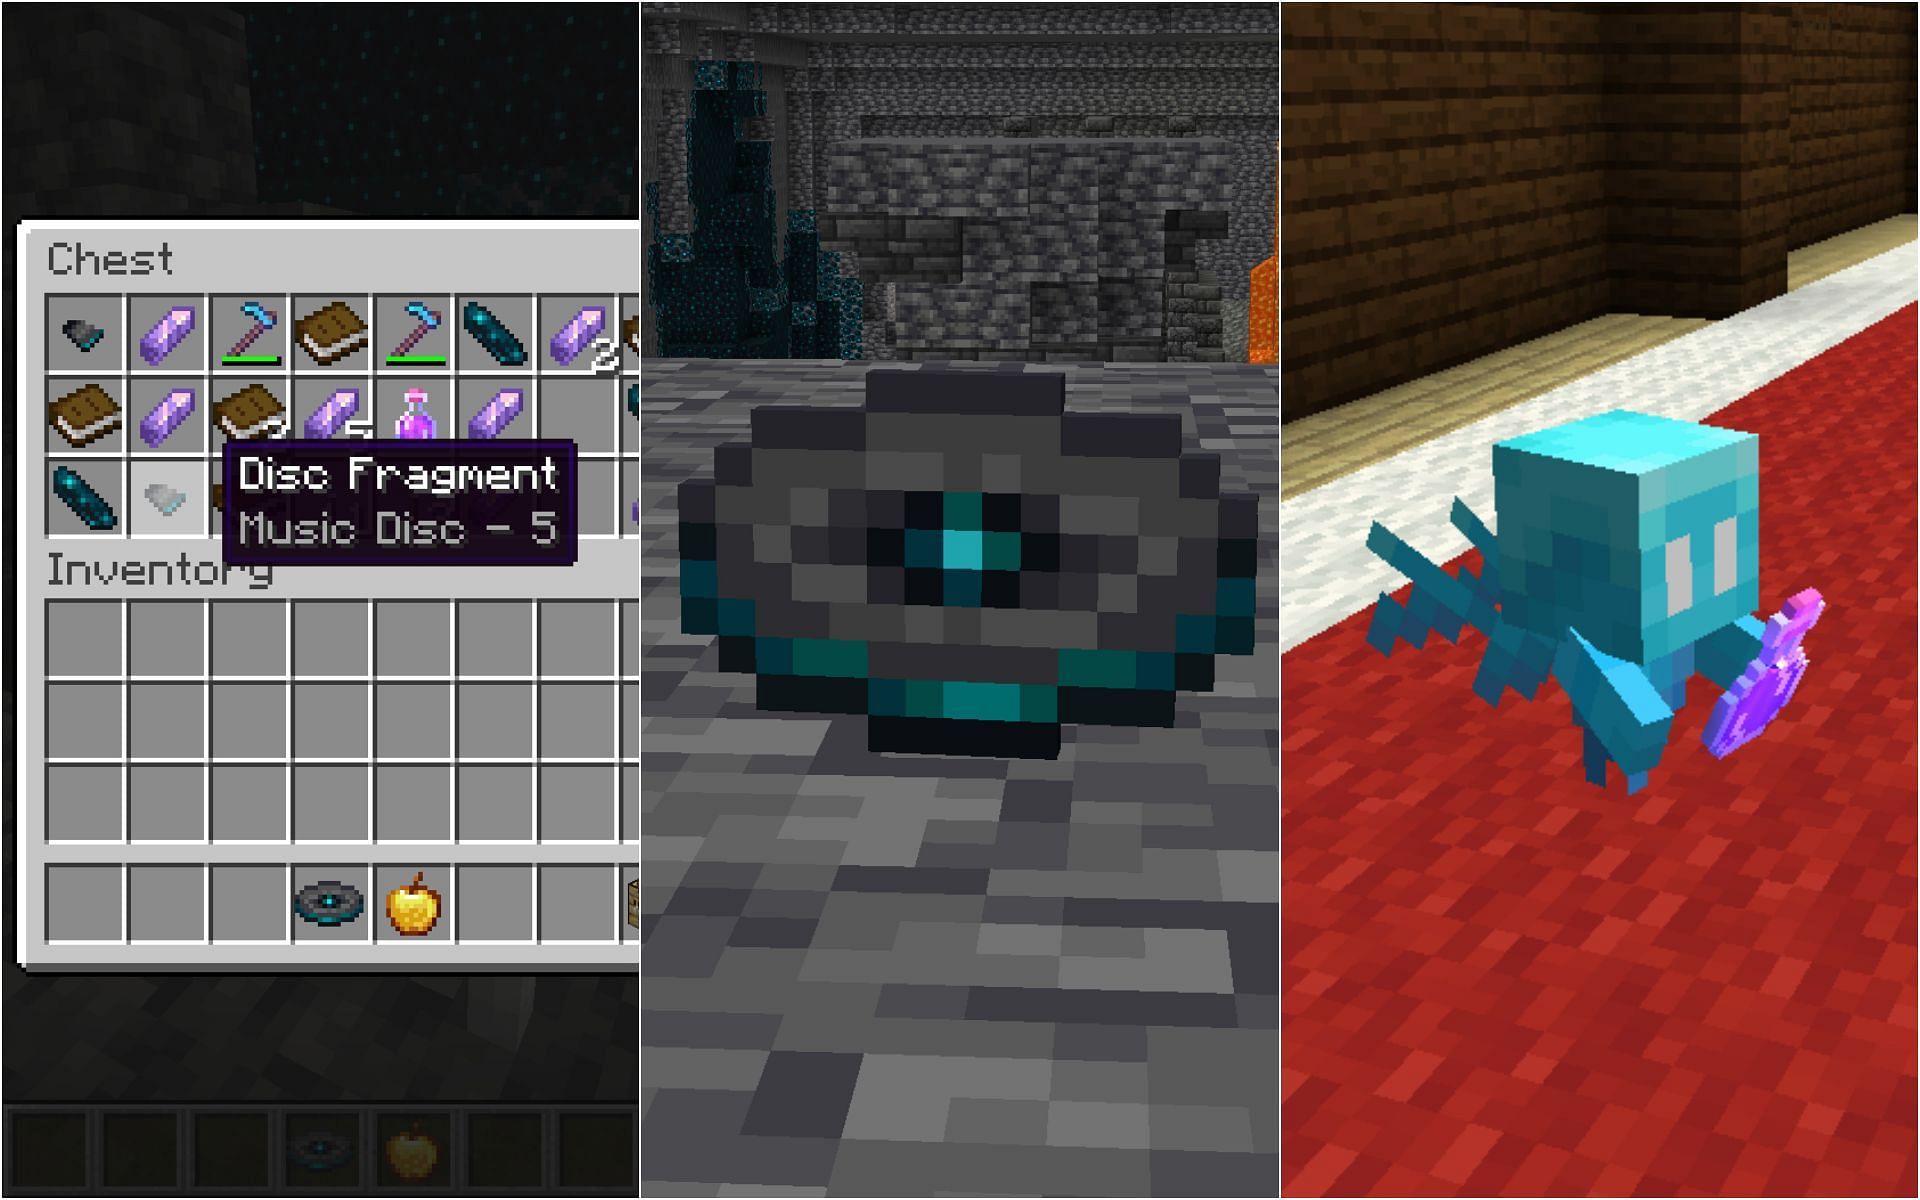 Changes and additions in the latest snapshot (Image via Mojang)